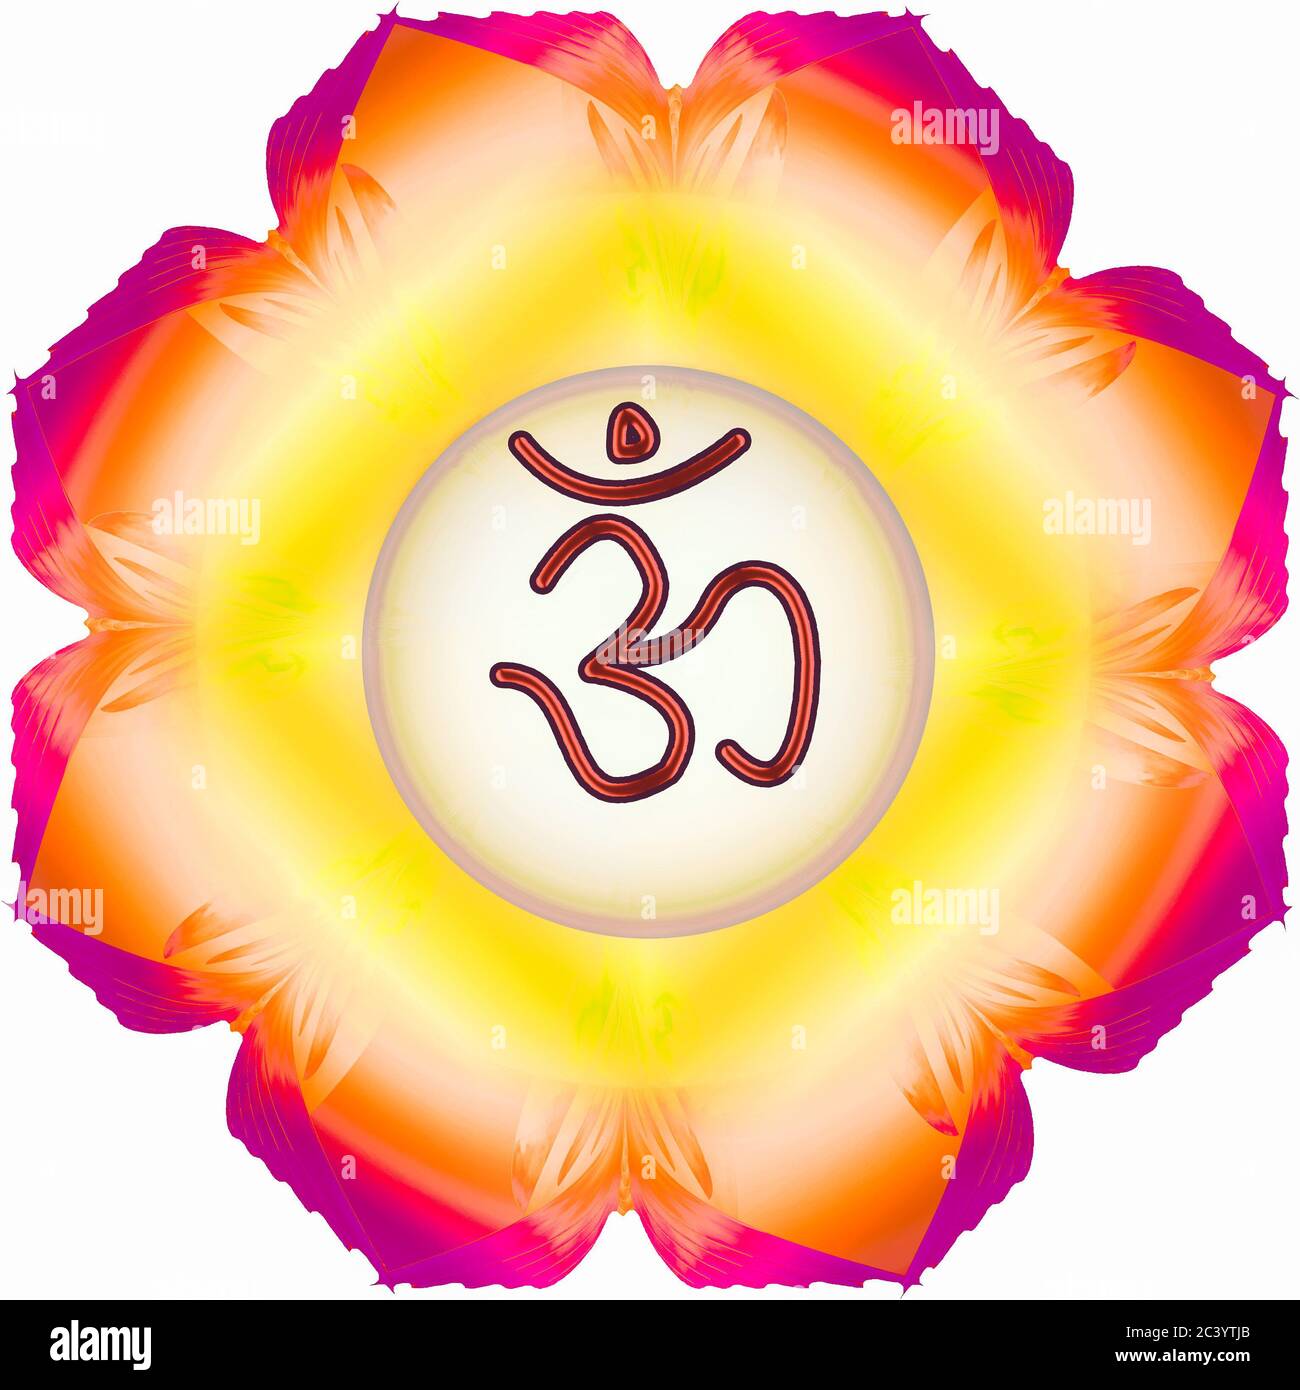 colorful background and hindu religion symbol om  word Stock Photo